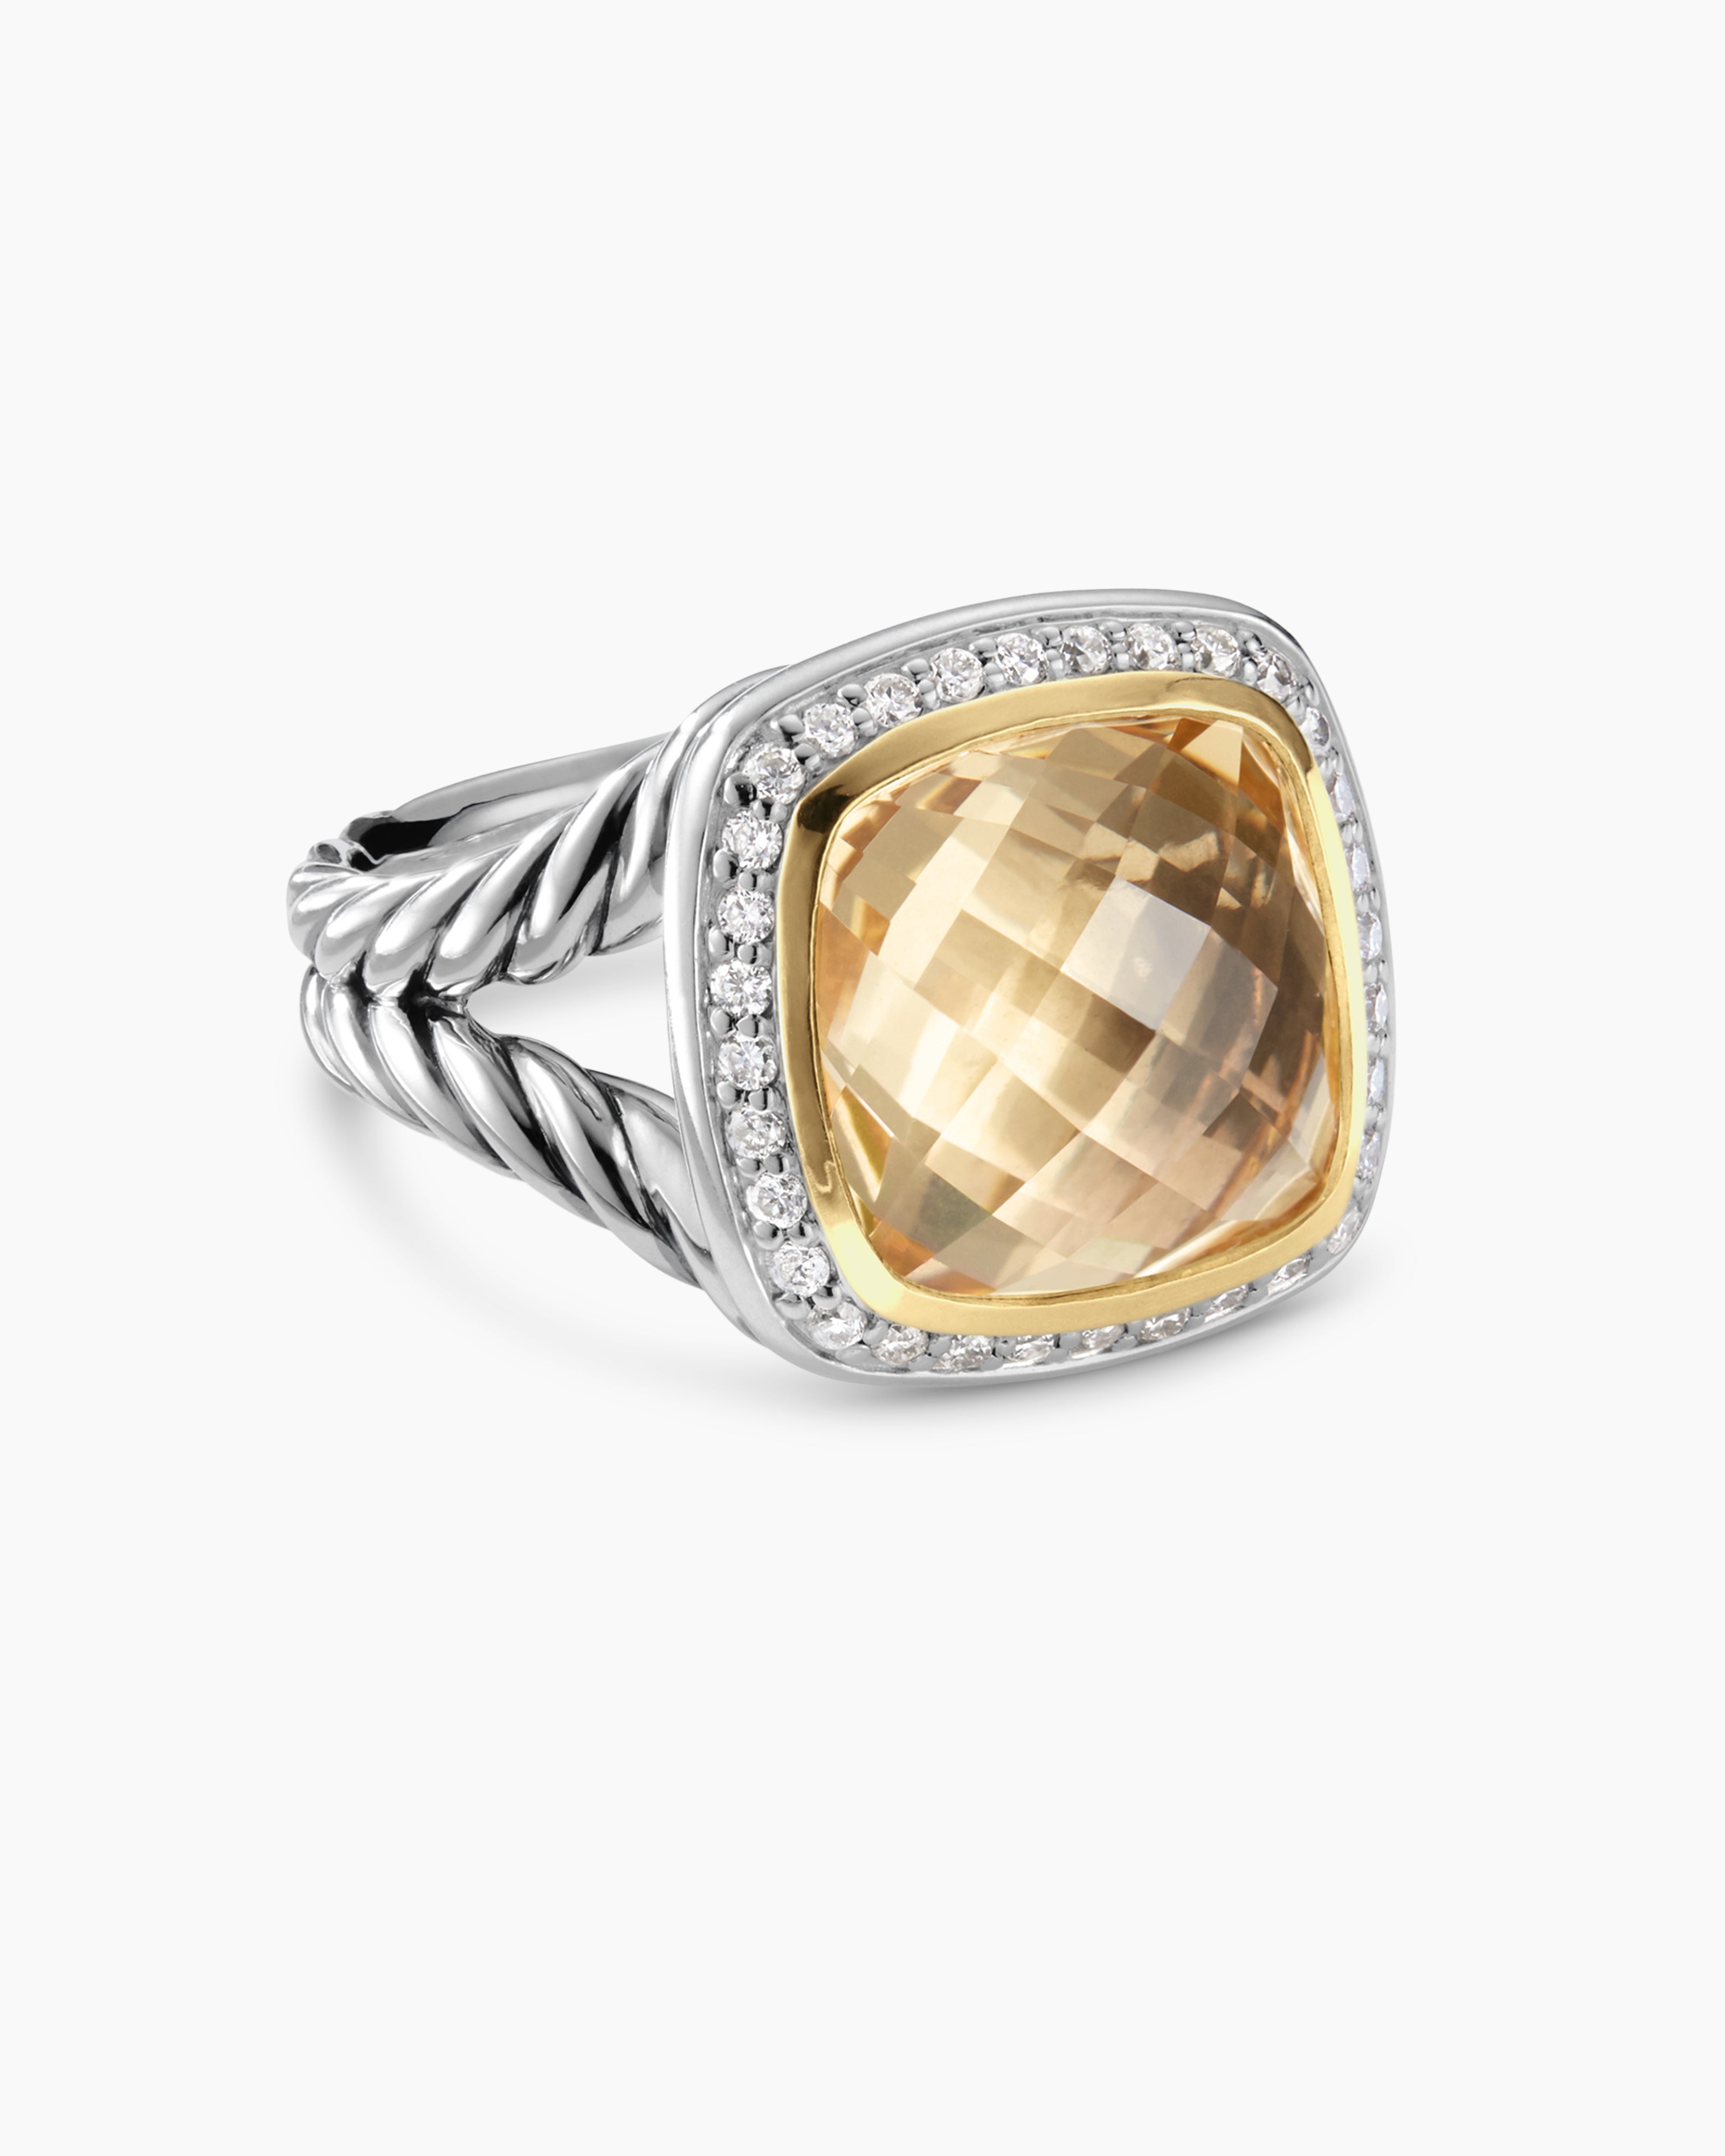 Ring with Champagne Citrine and Diamonds with 18K Gold